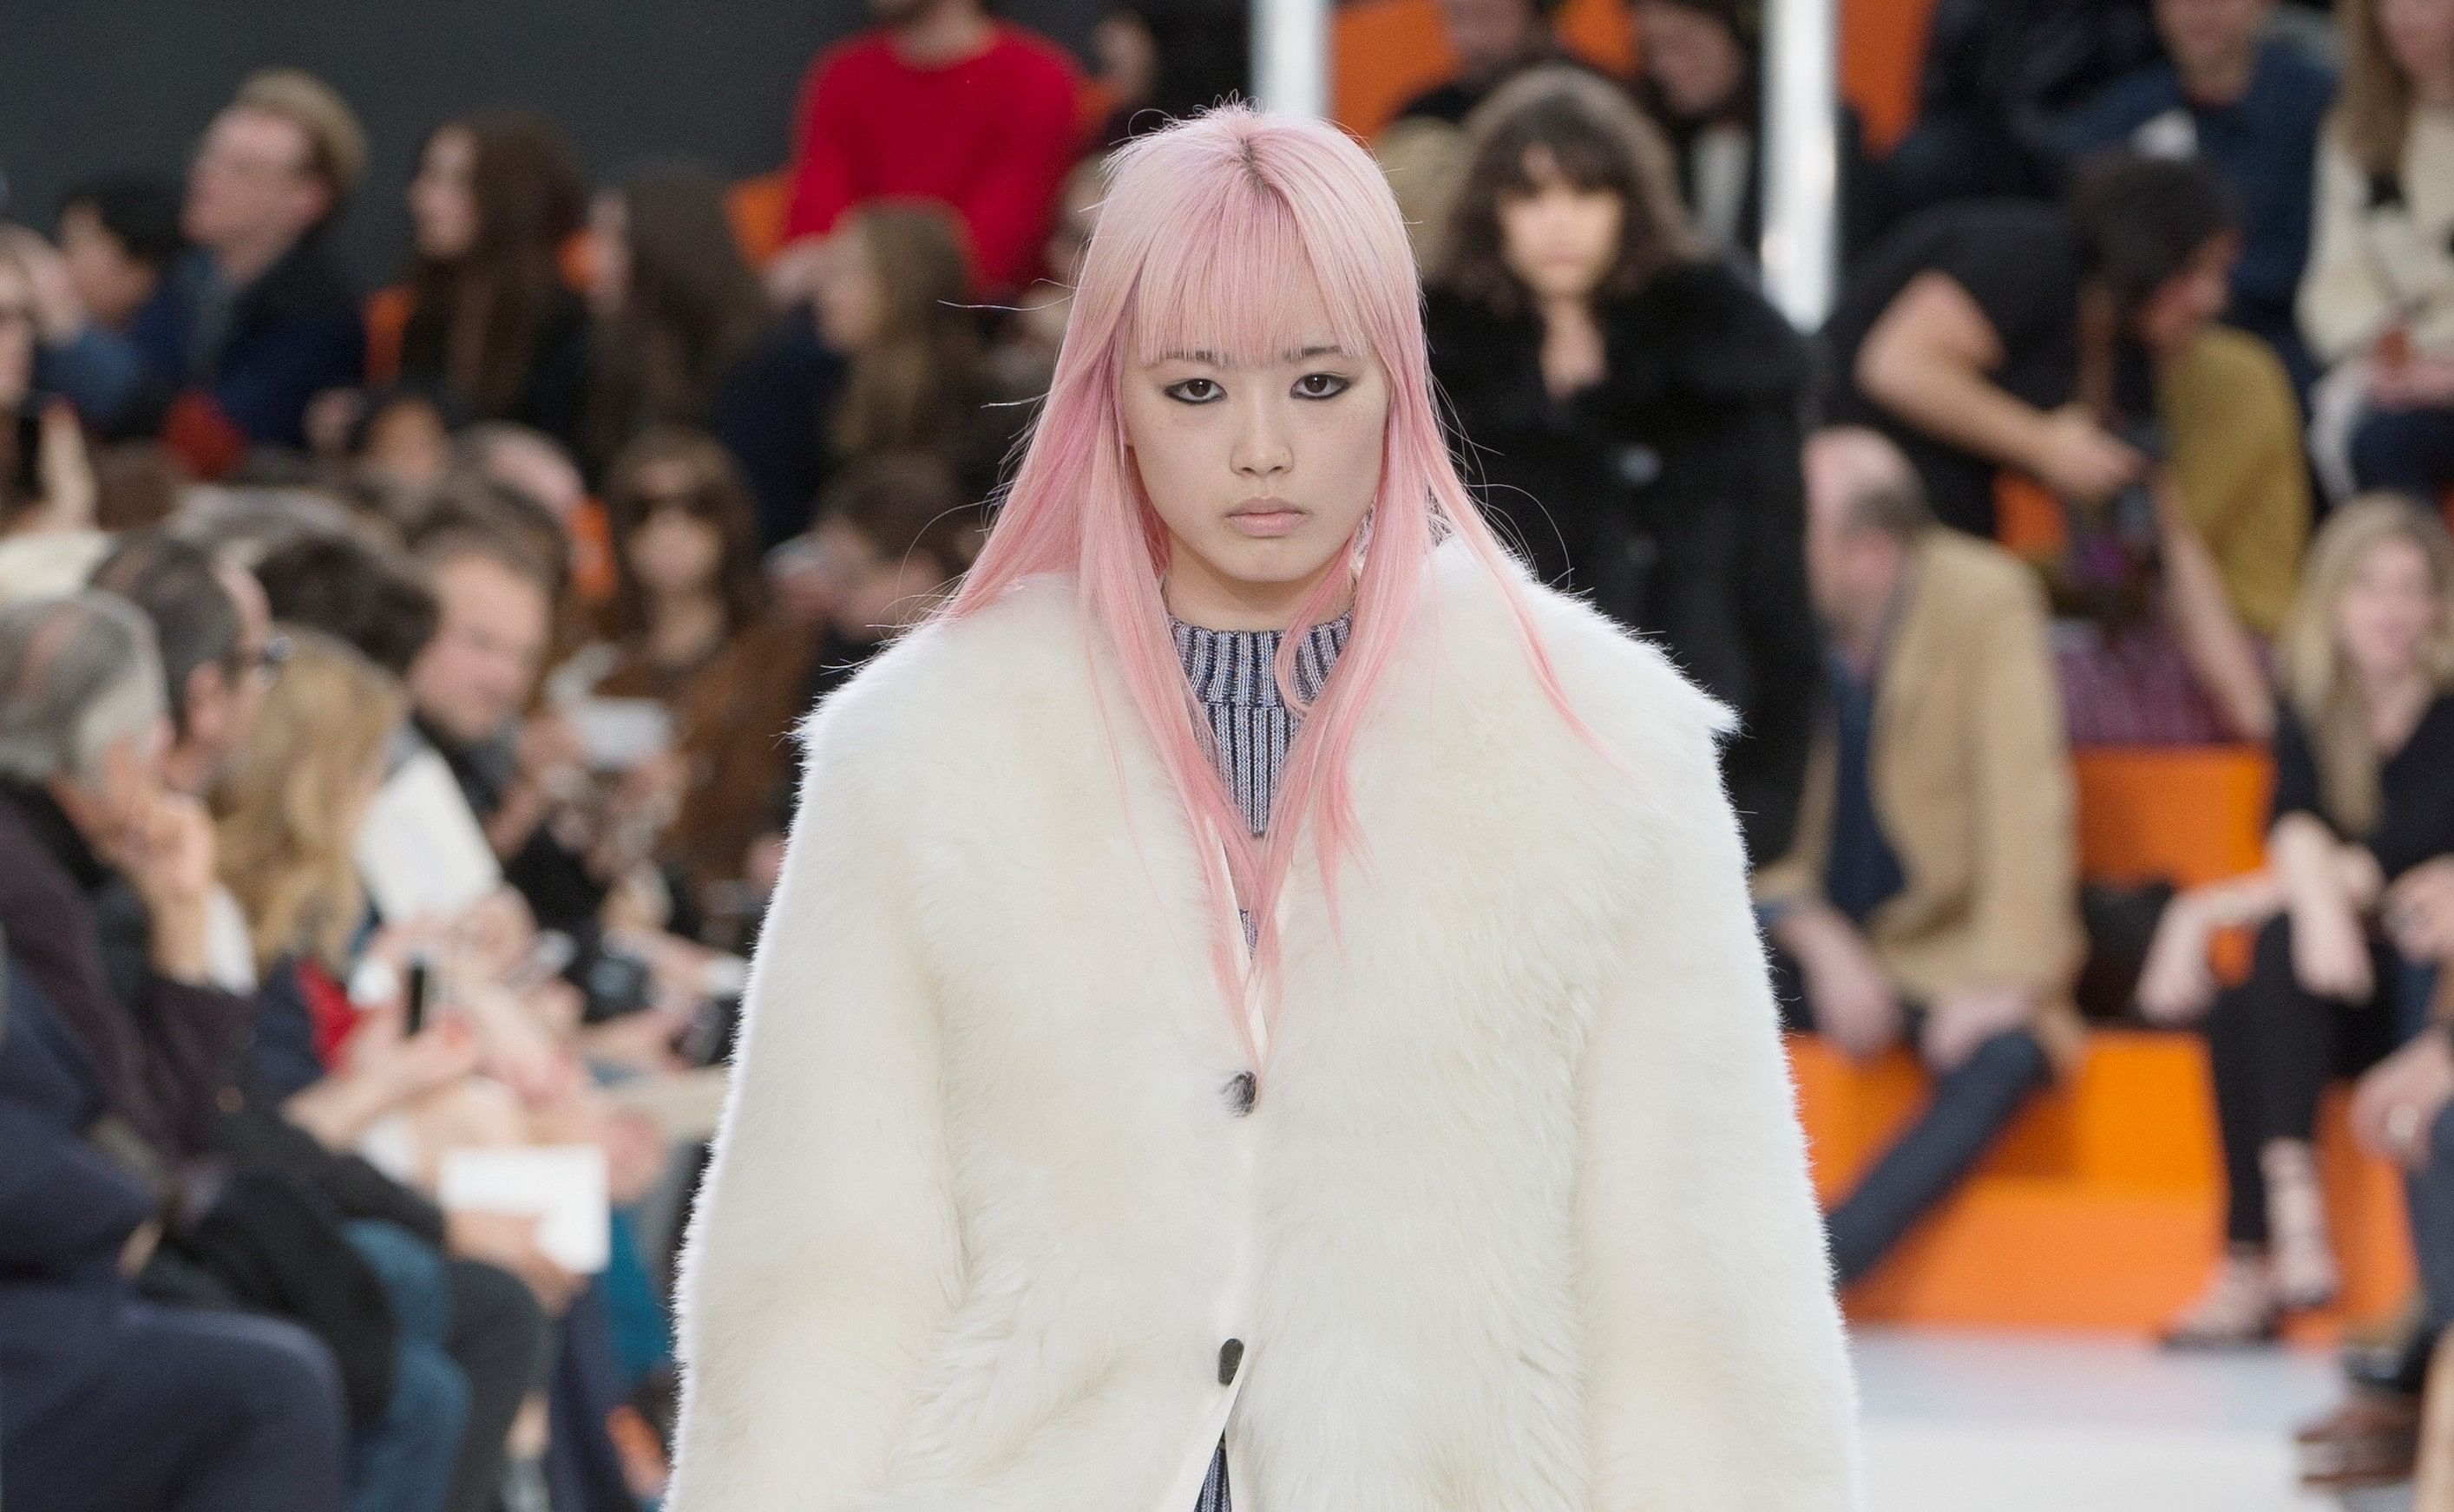 Street Style: Seriously Quirky Cool Asians At Fashion Week - Female